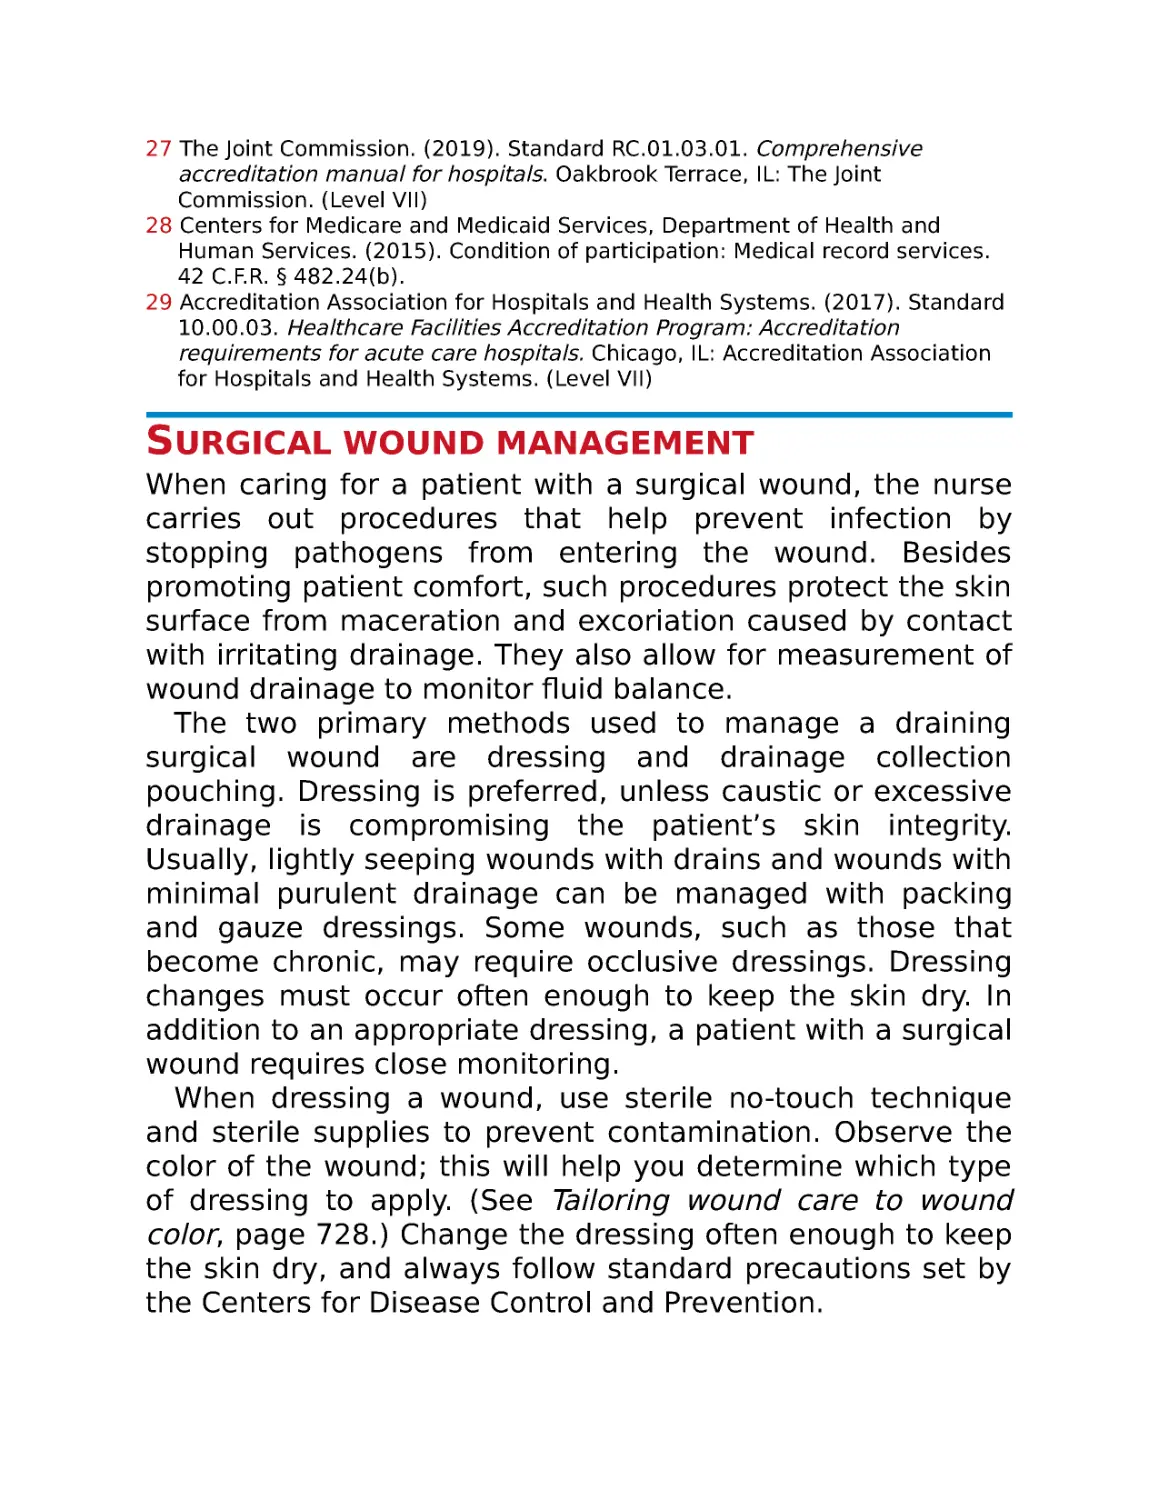 Surgical wound management